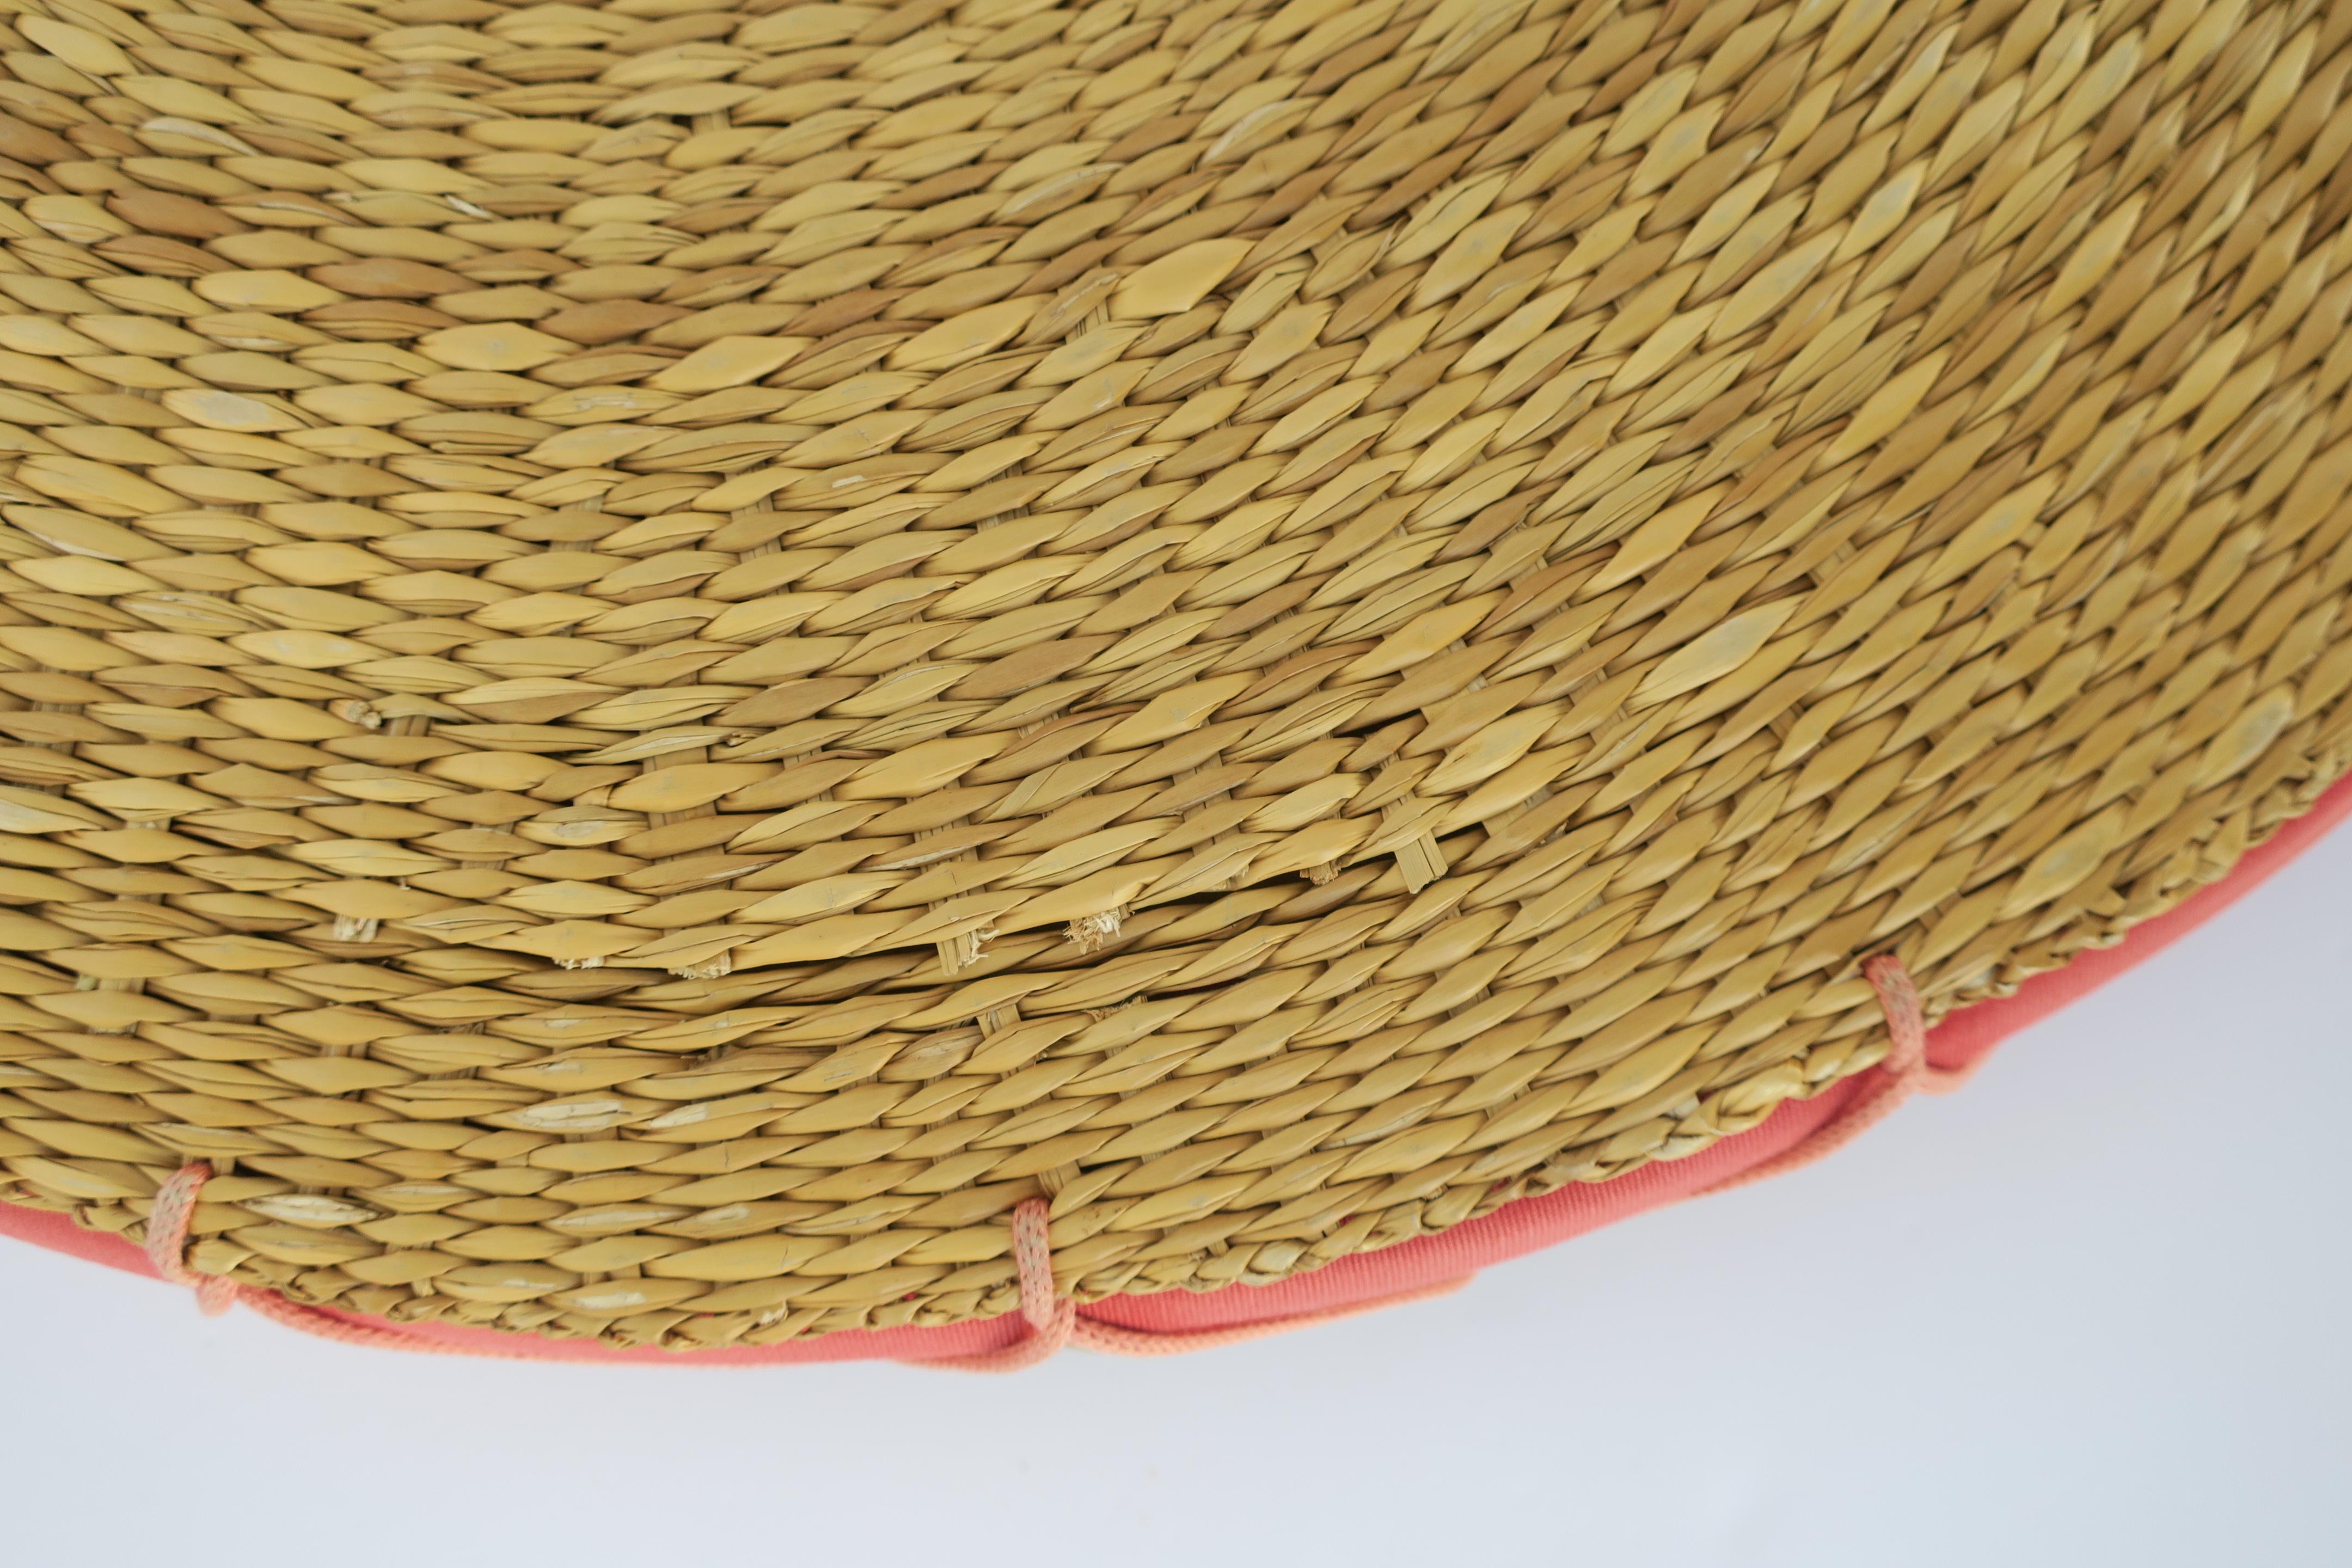 Wicker Seat or Floor Cushion, Watermelon Pink and Tan For Sale 5